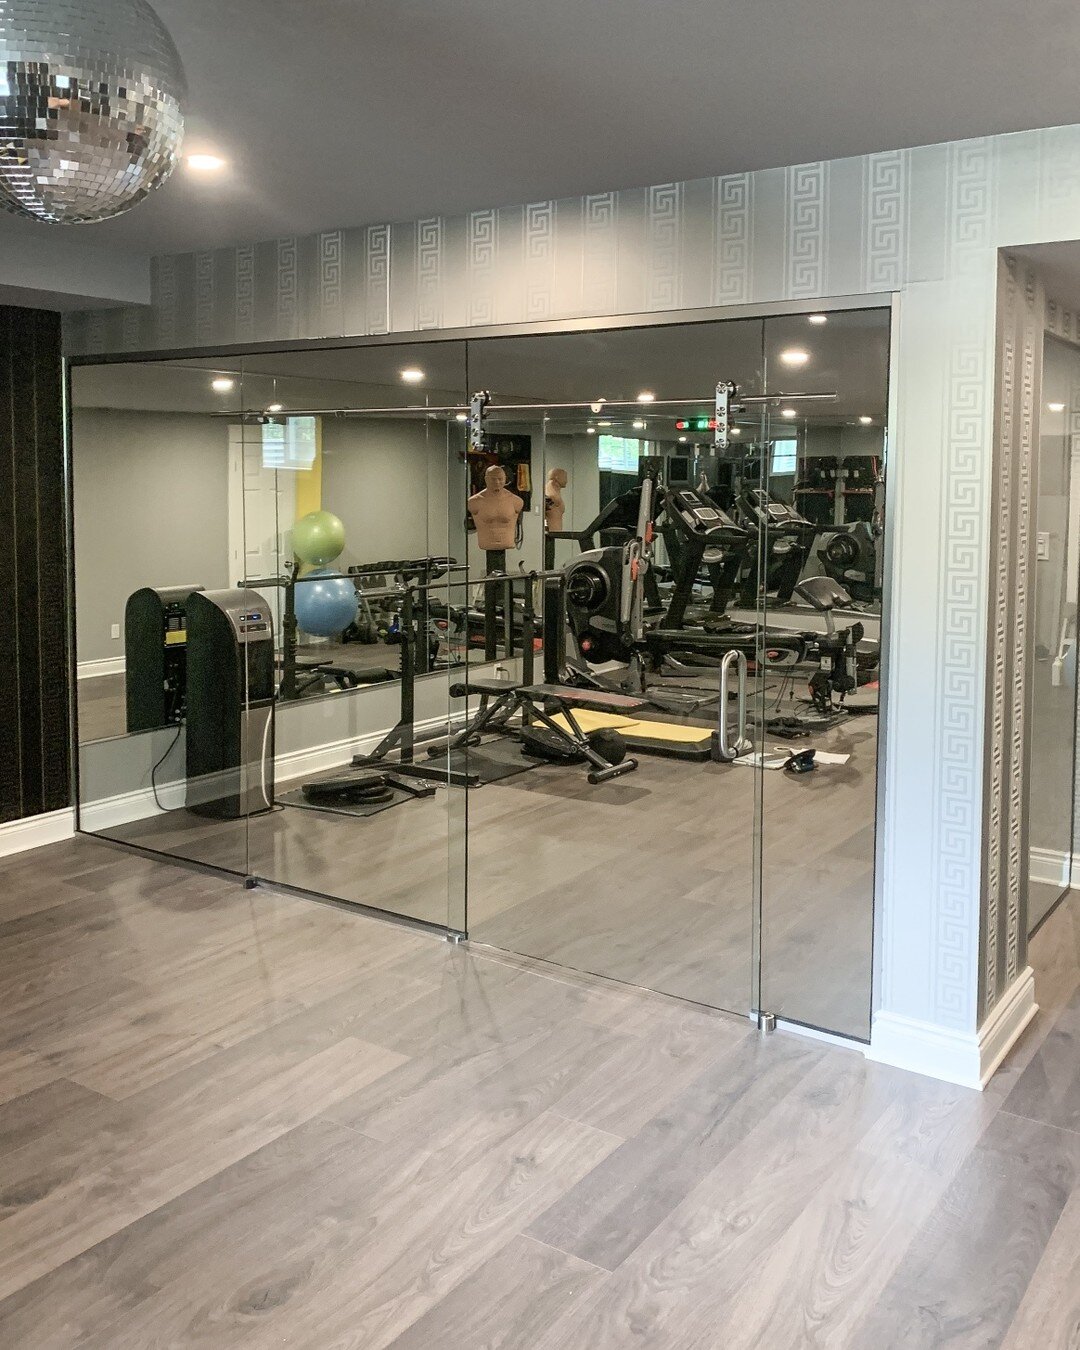 Glass wall and mirrors installed for this basement gym 👍